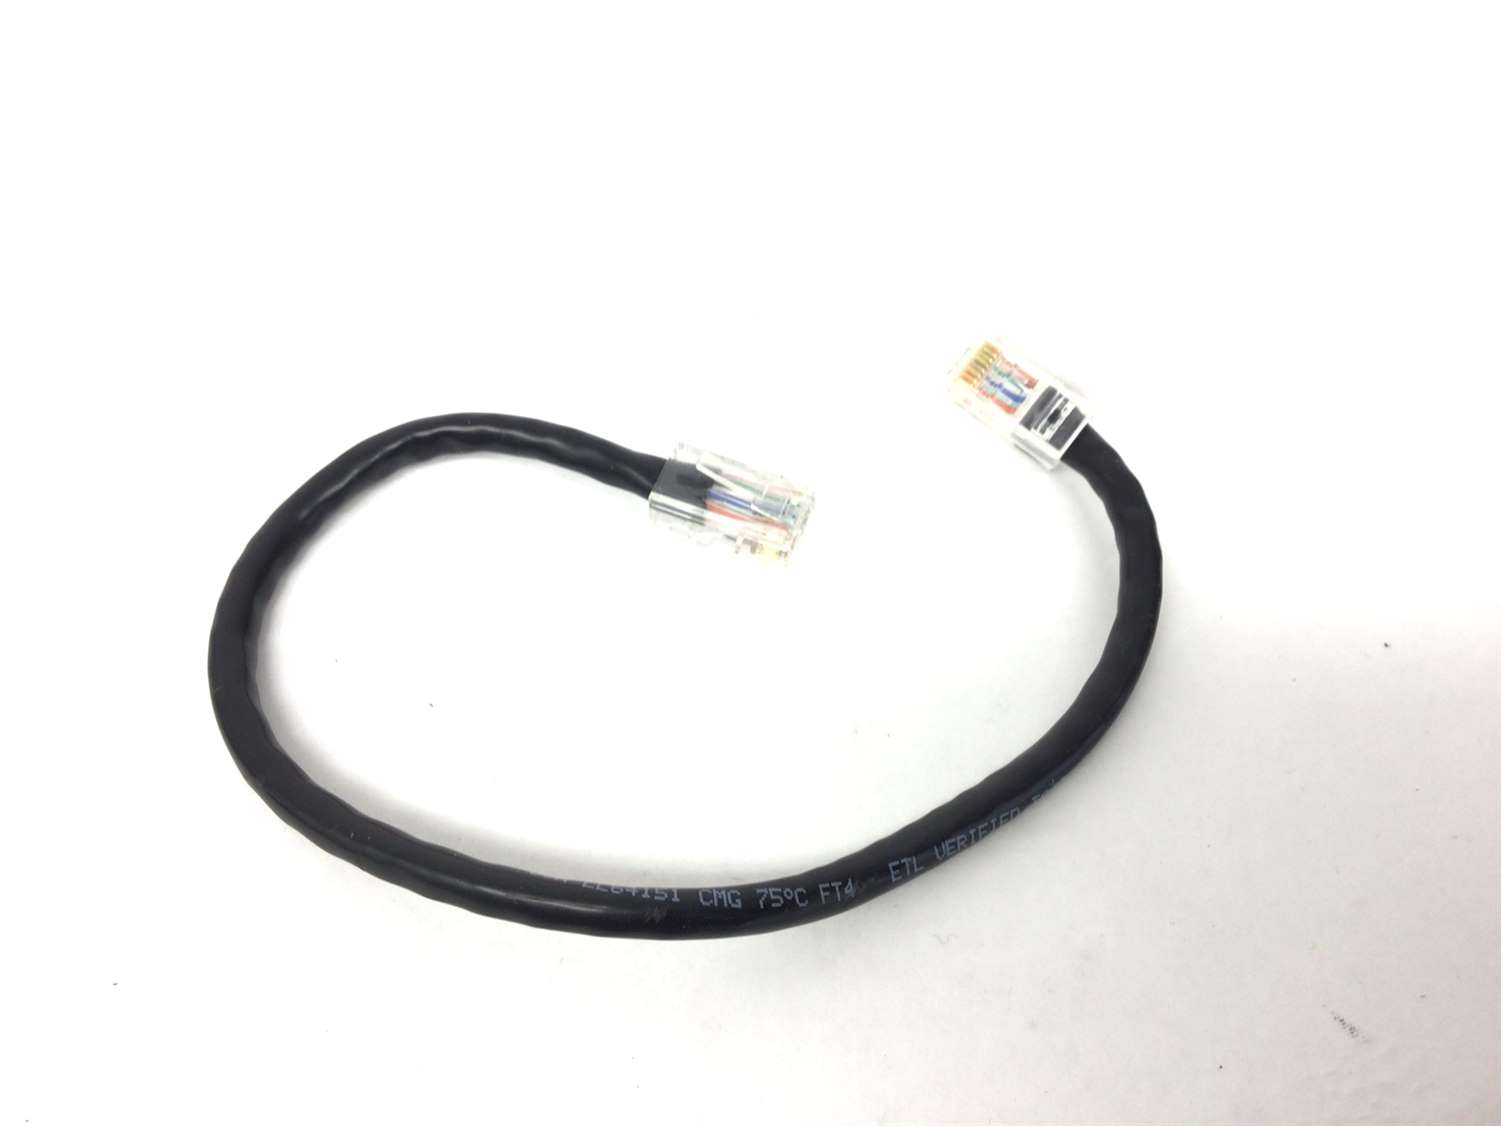 Short RJ45 Inteface Wire Cable (Used)